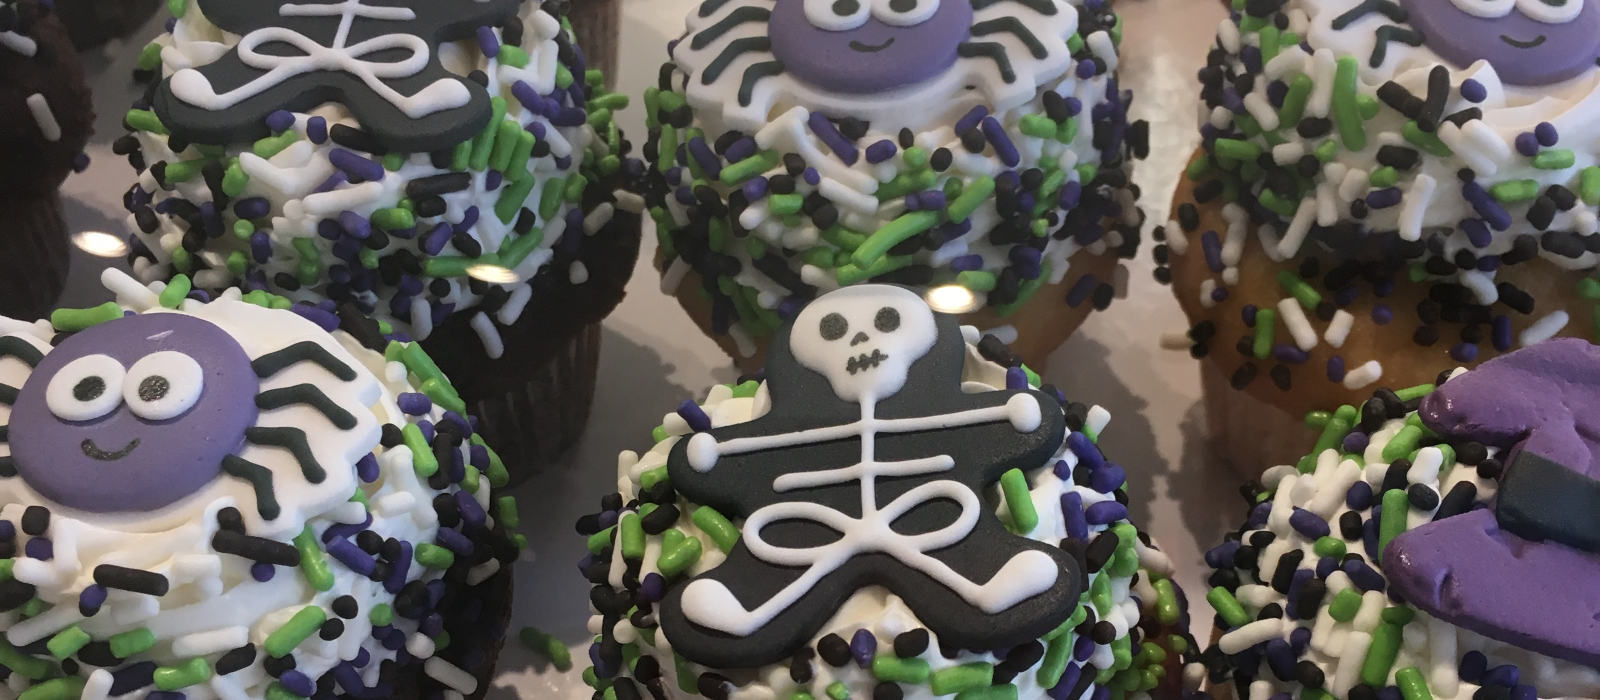 Several cupcakes decorated with cute spooky things for Halloween, including a skeleton, a cute spider, and a witch hat.